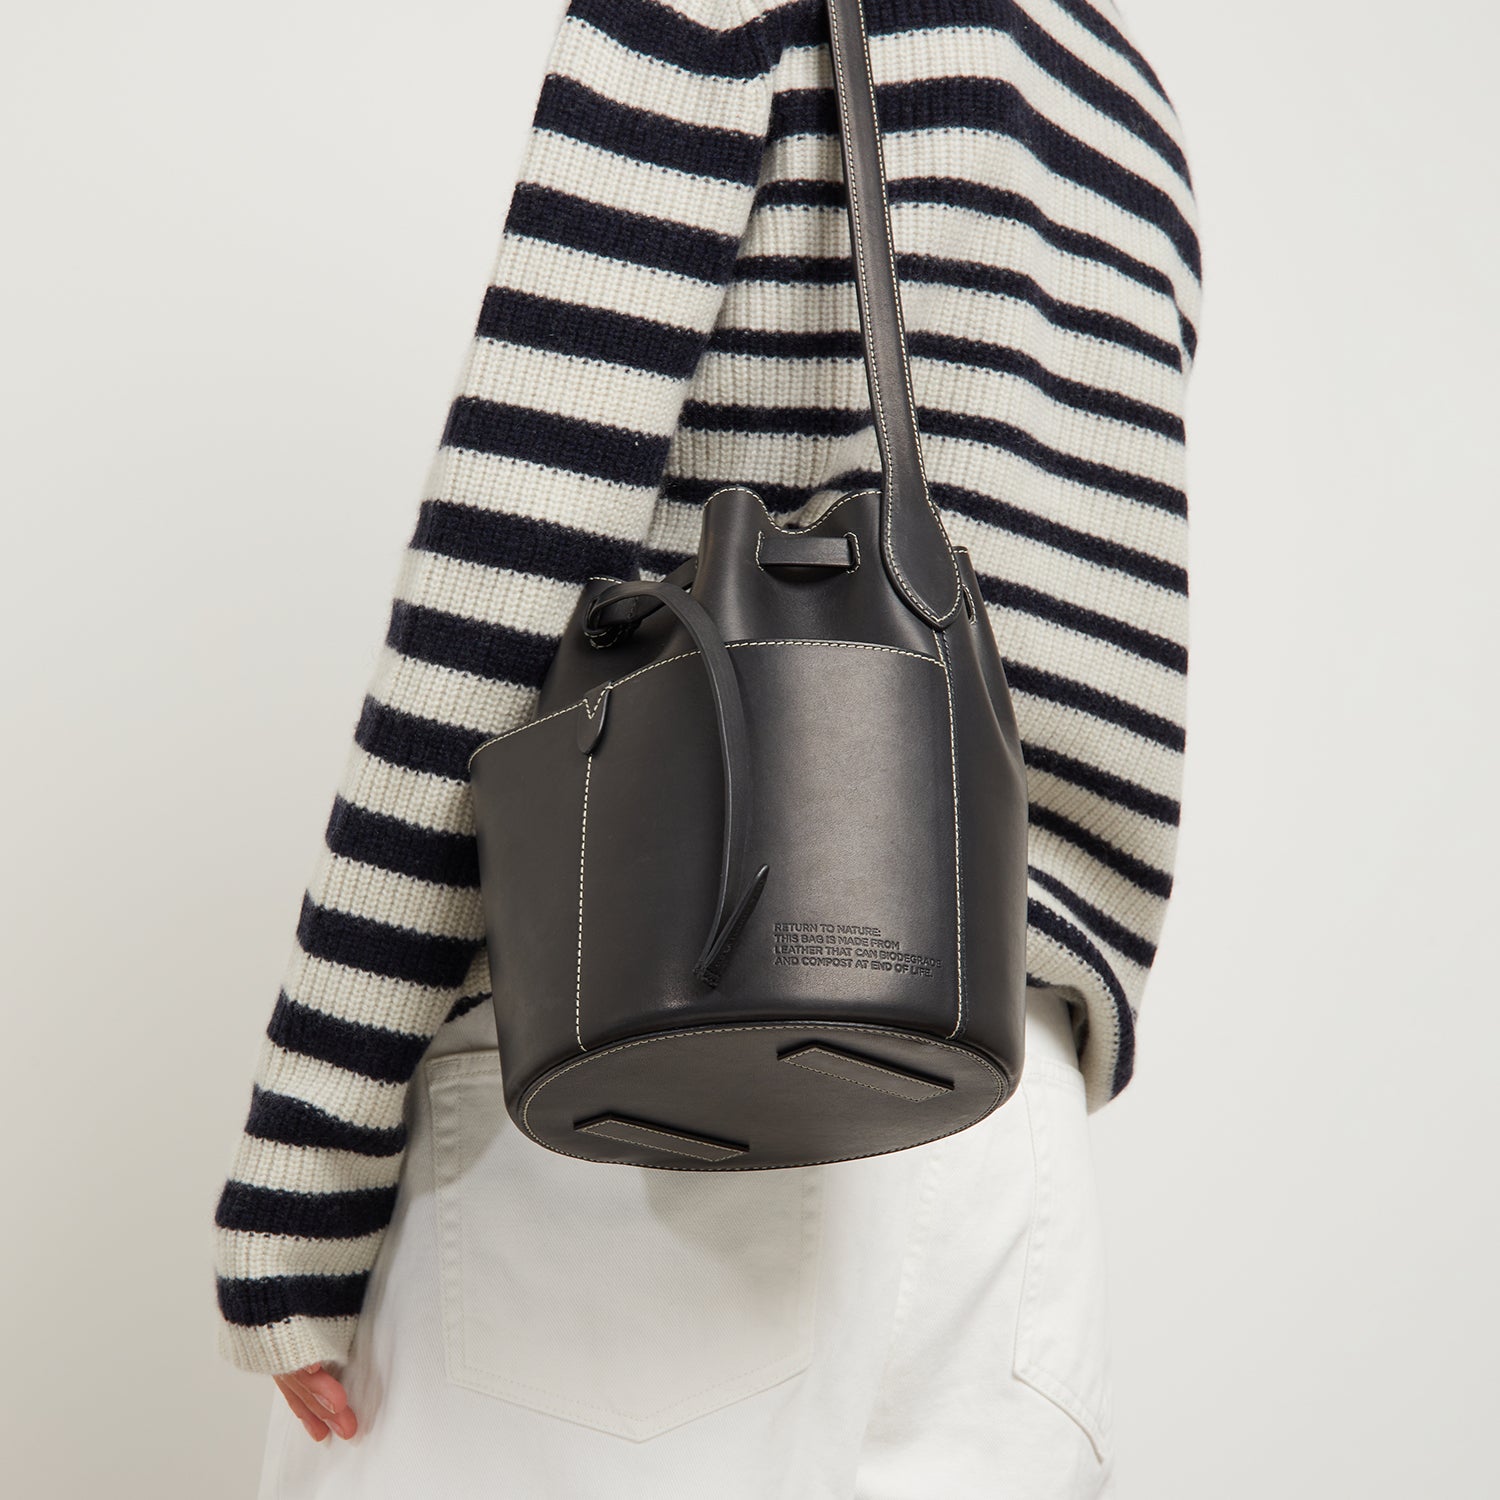 Return to Nature Small Bucket Bag -

                  
                    Compostable Leather in Black -
                  

                  Anya Hindmarch UK
